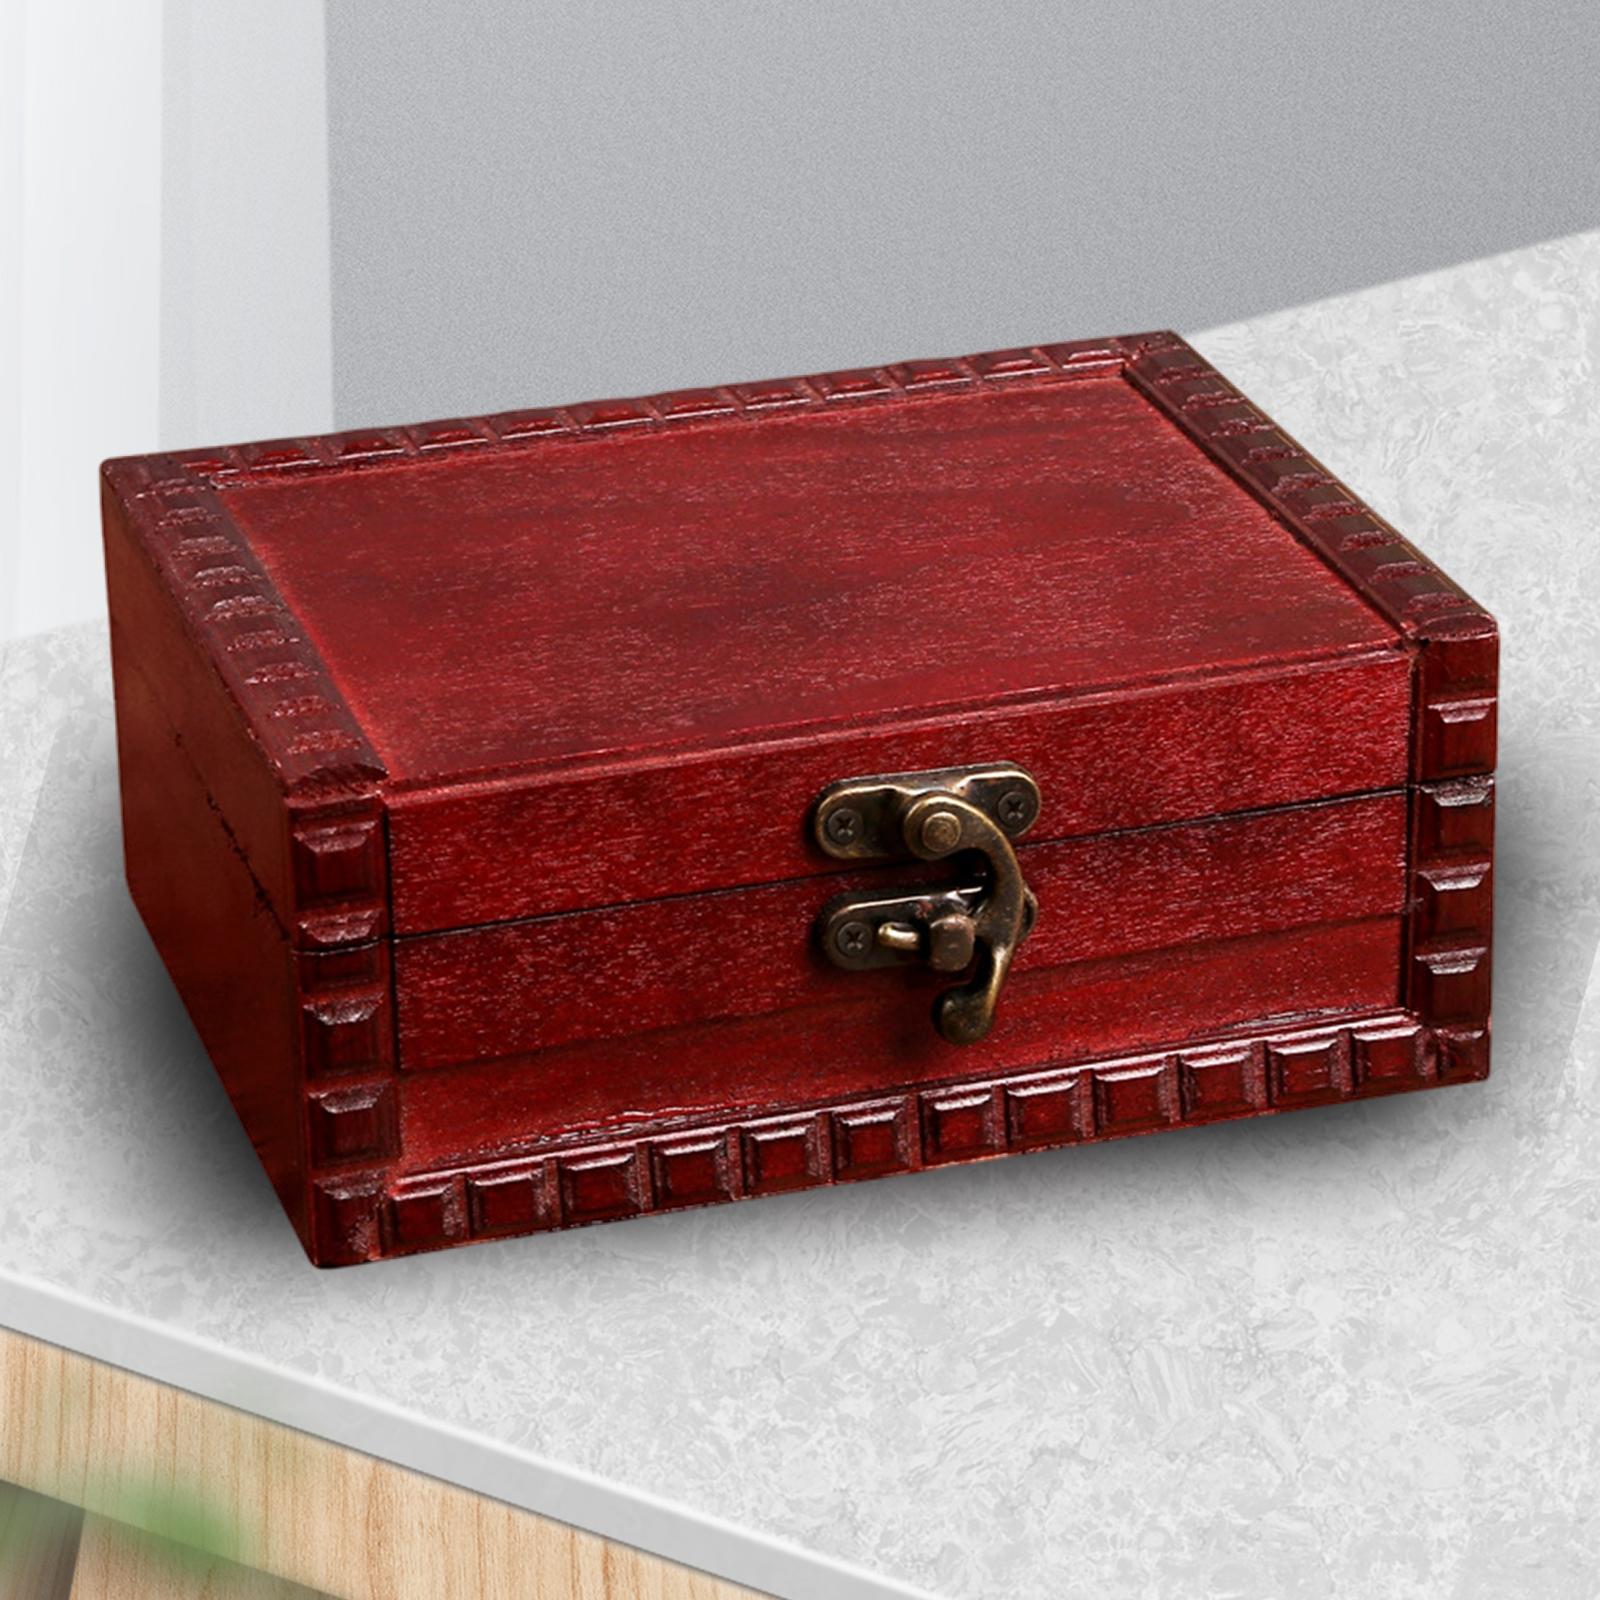 Vintage Style Wooden Box Decorative Jewelry Gift Storage Box with Lock with Lock Clasp 